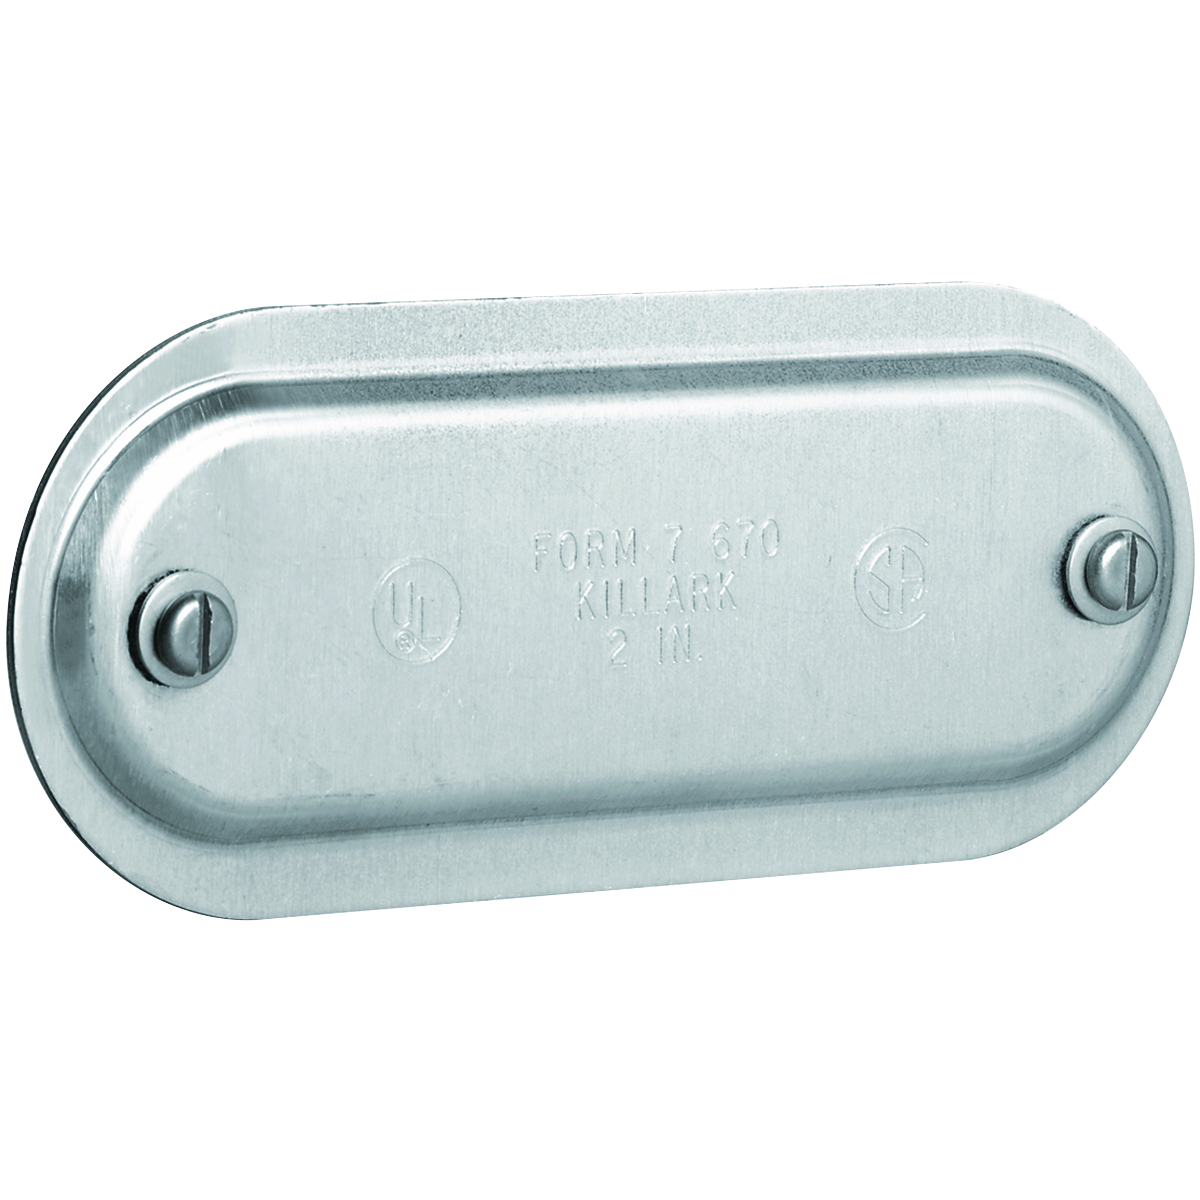 DURALOY 7 SERIES - STAMPED STEEL CONDUIT BODY COVER - HUB SIZE 1-1/4INCH